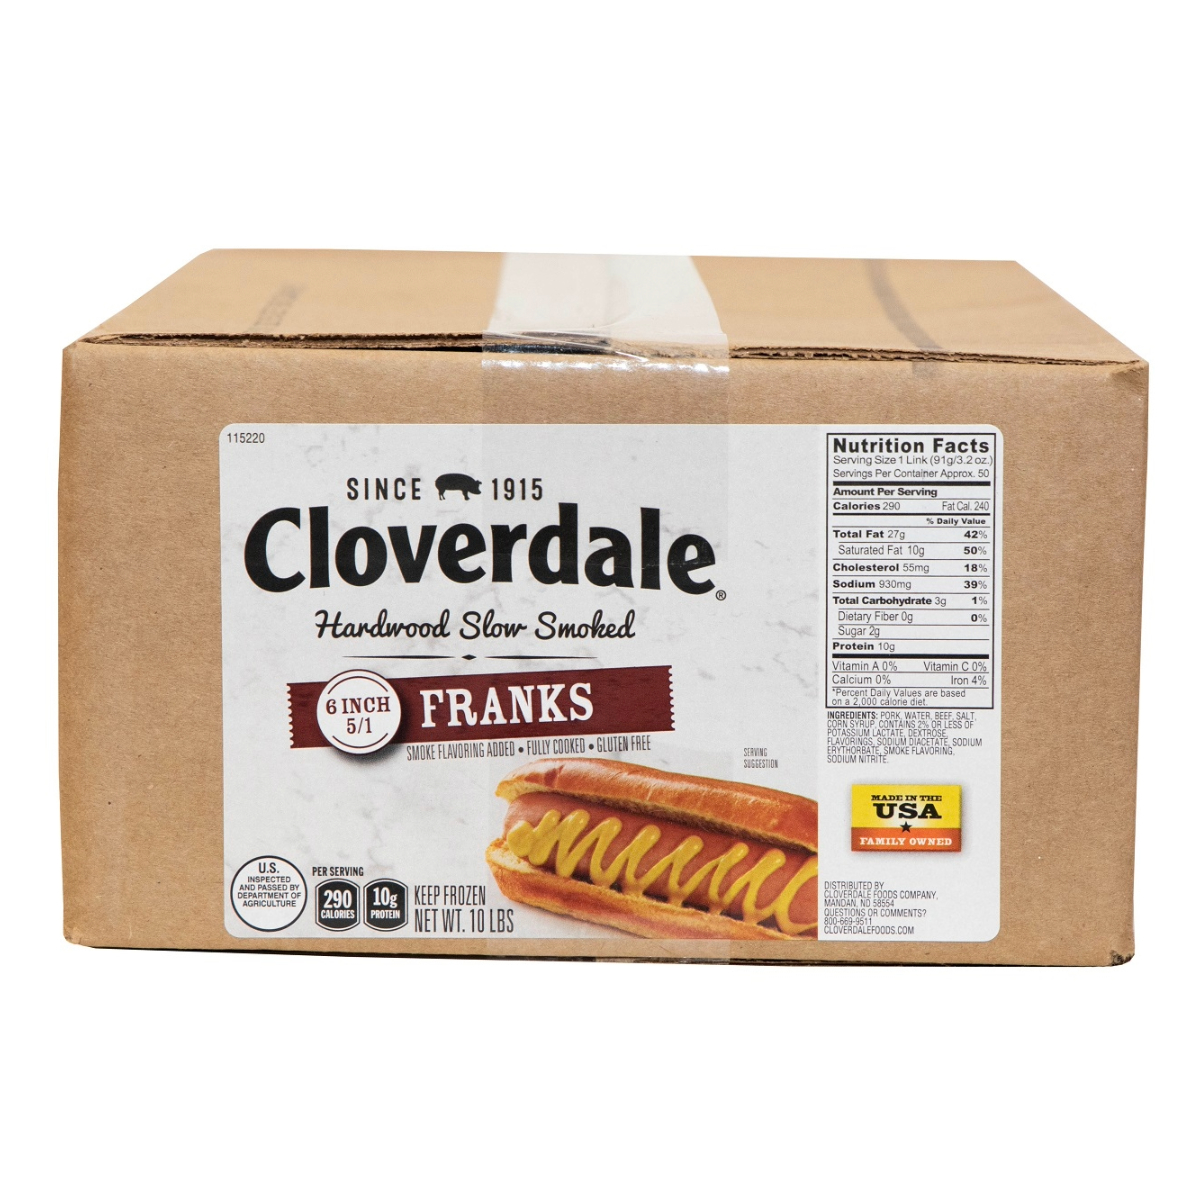 CLOVERDALE MEAT HOT DOGS 6 INCH 5/1 FRANKS